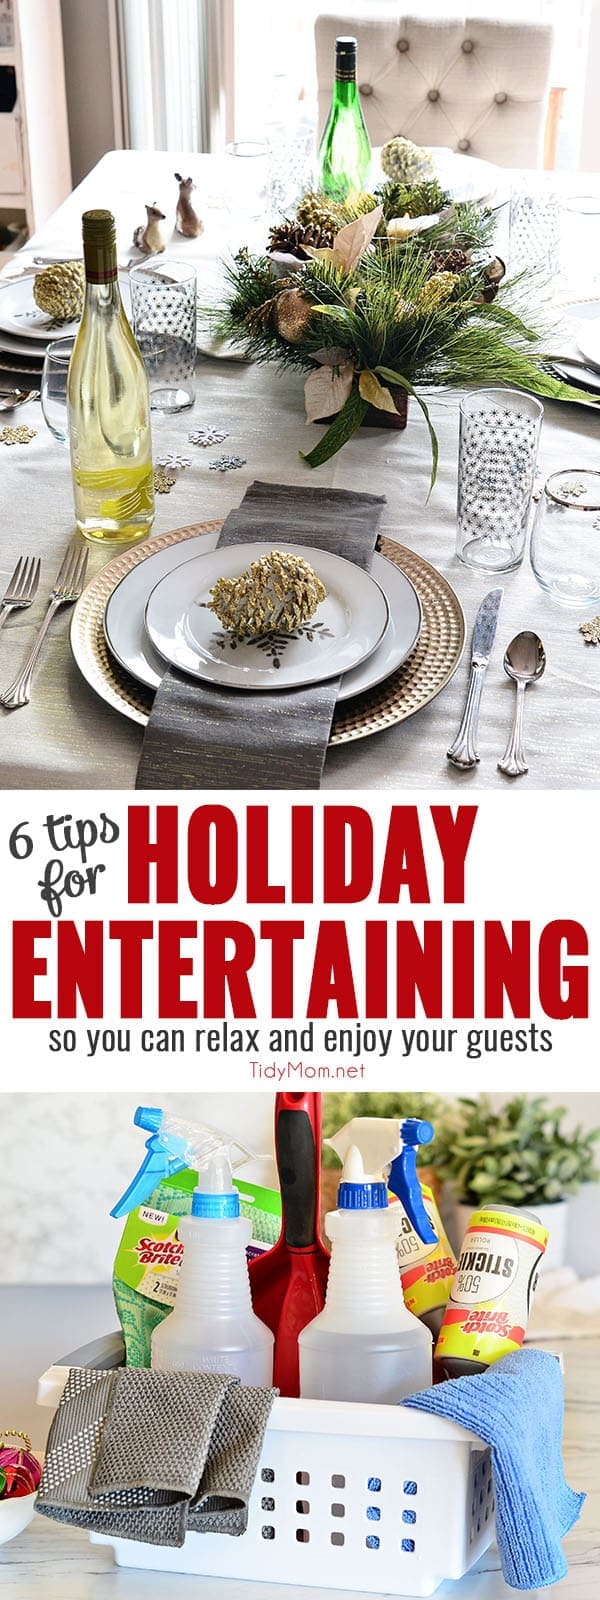 Holiday entertaining is upon us. One of my favorite holiday entertaining tips is to keep an emergency clean up kit handy for party spills and mishaps. 6 HOLIDAY ENTERTAINING TIPS - at TidyMom.net